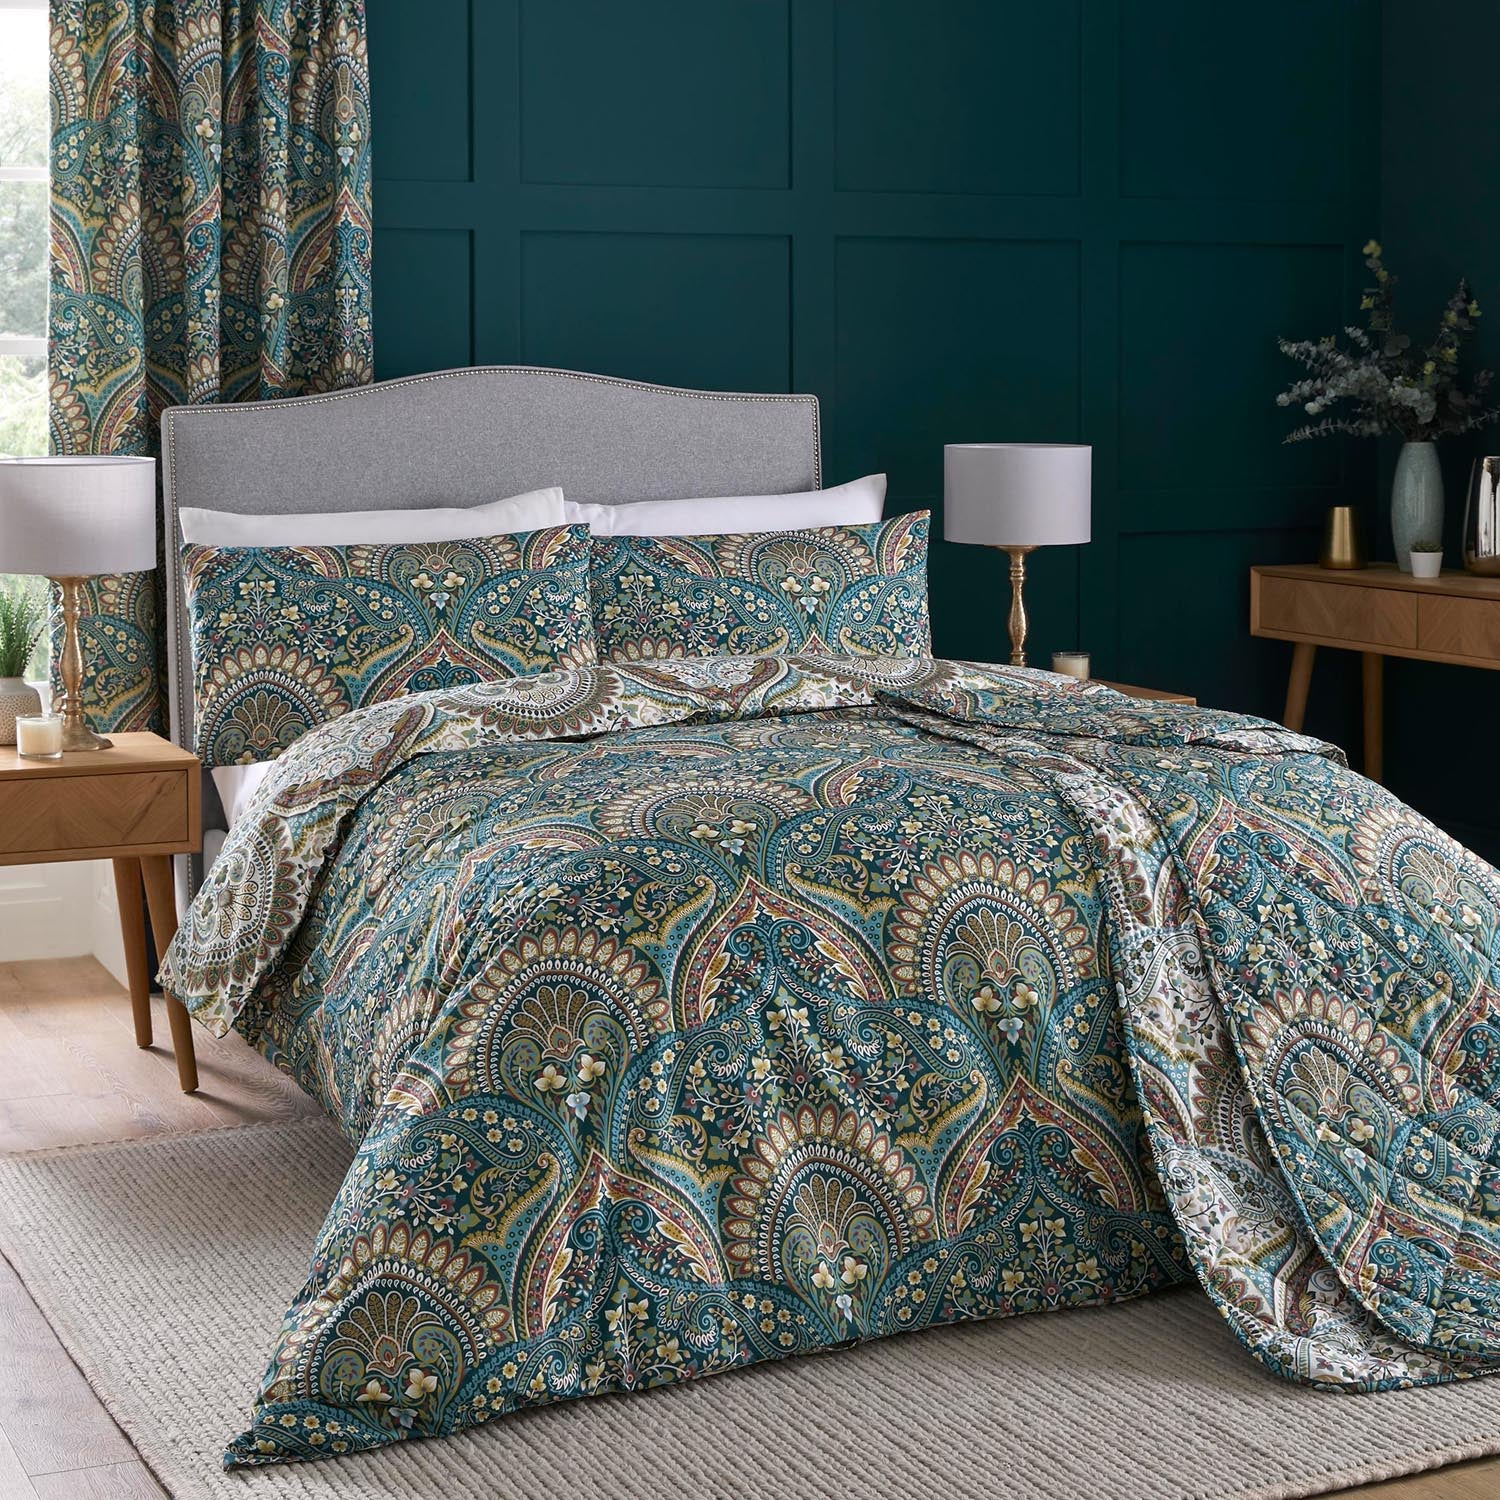 The Home Collection Palace Paisley Duvet Cover Set - Teal 1 Shaws Department Stores